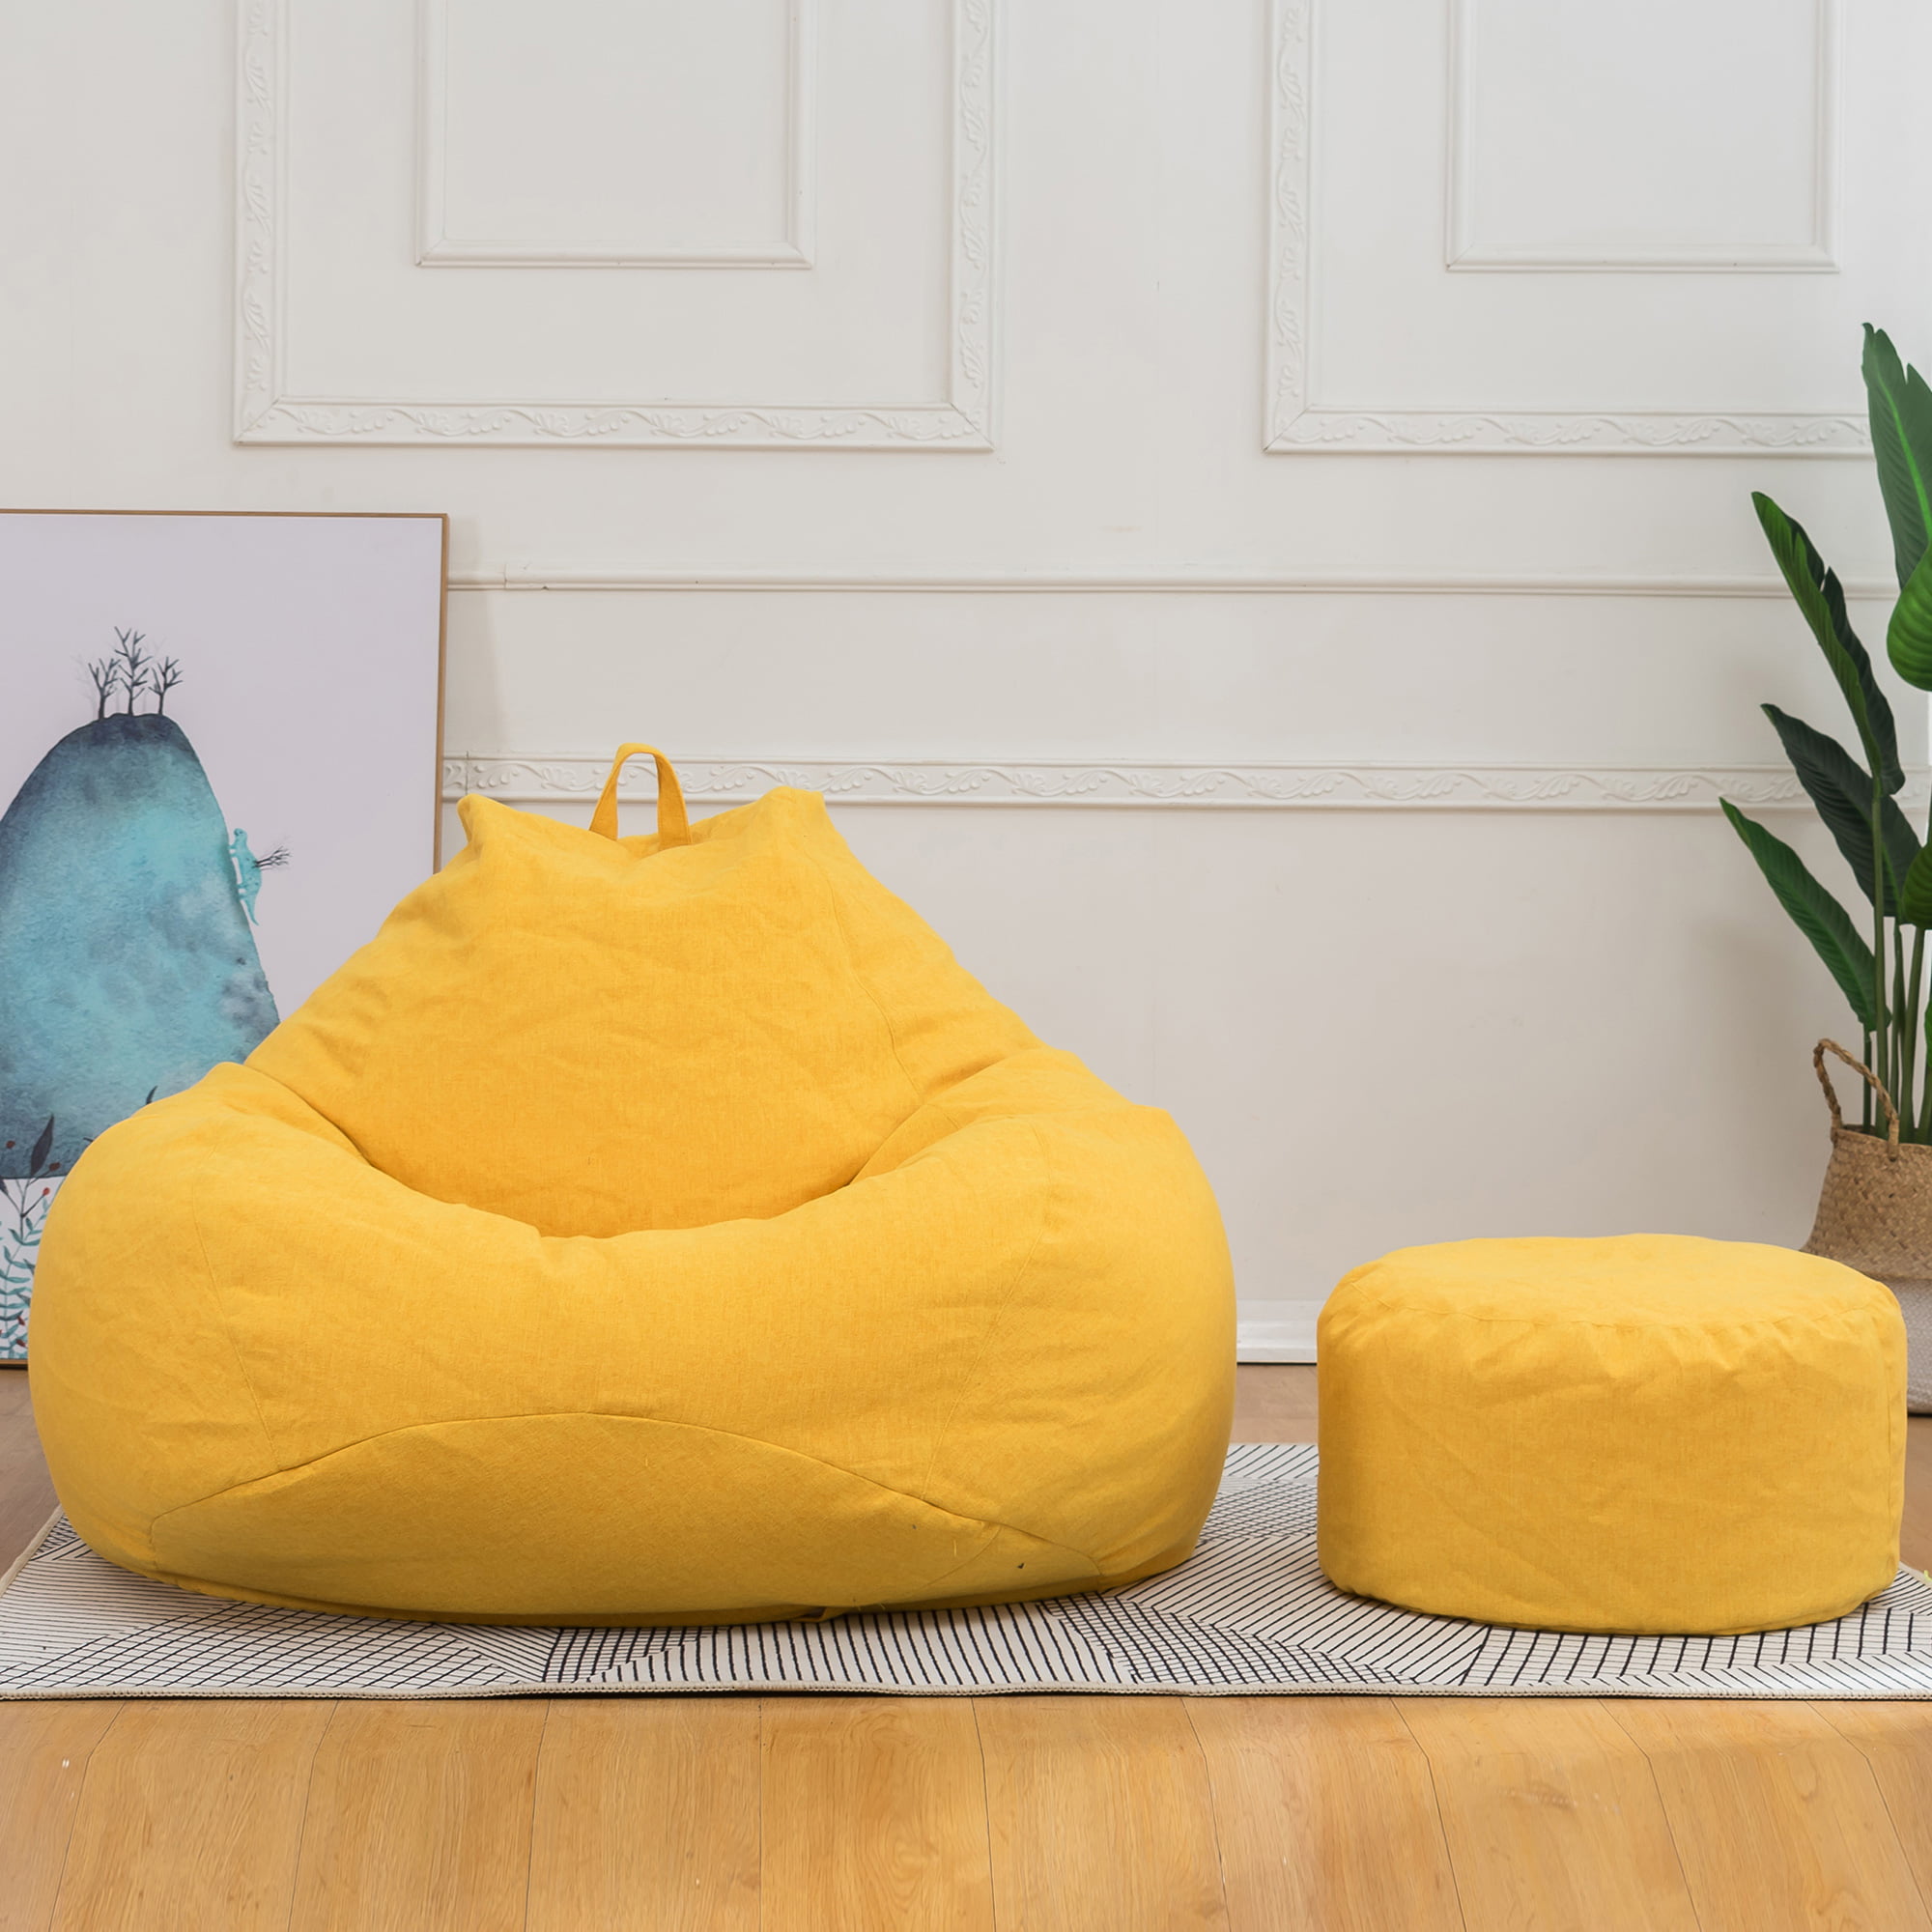 Frogued Sofa Bean Bag No Filler Soft Washable Comfortable Anti-fading Wear  Resistant High Elastic Extra Large Bean Bag Chair Cover Home Decor (Yellow)  